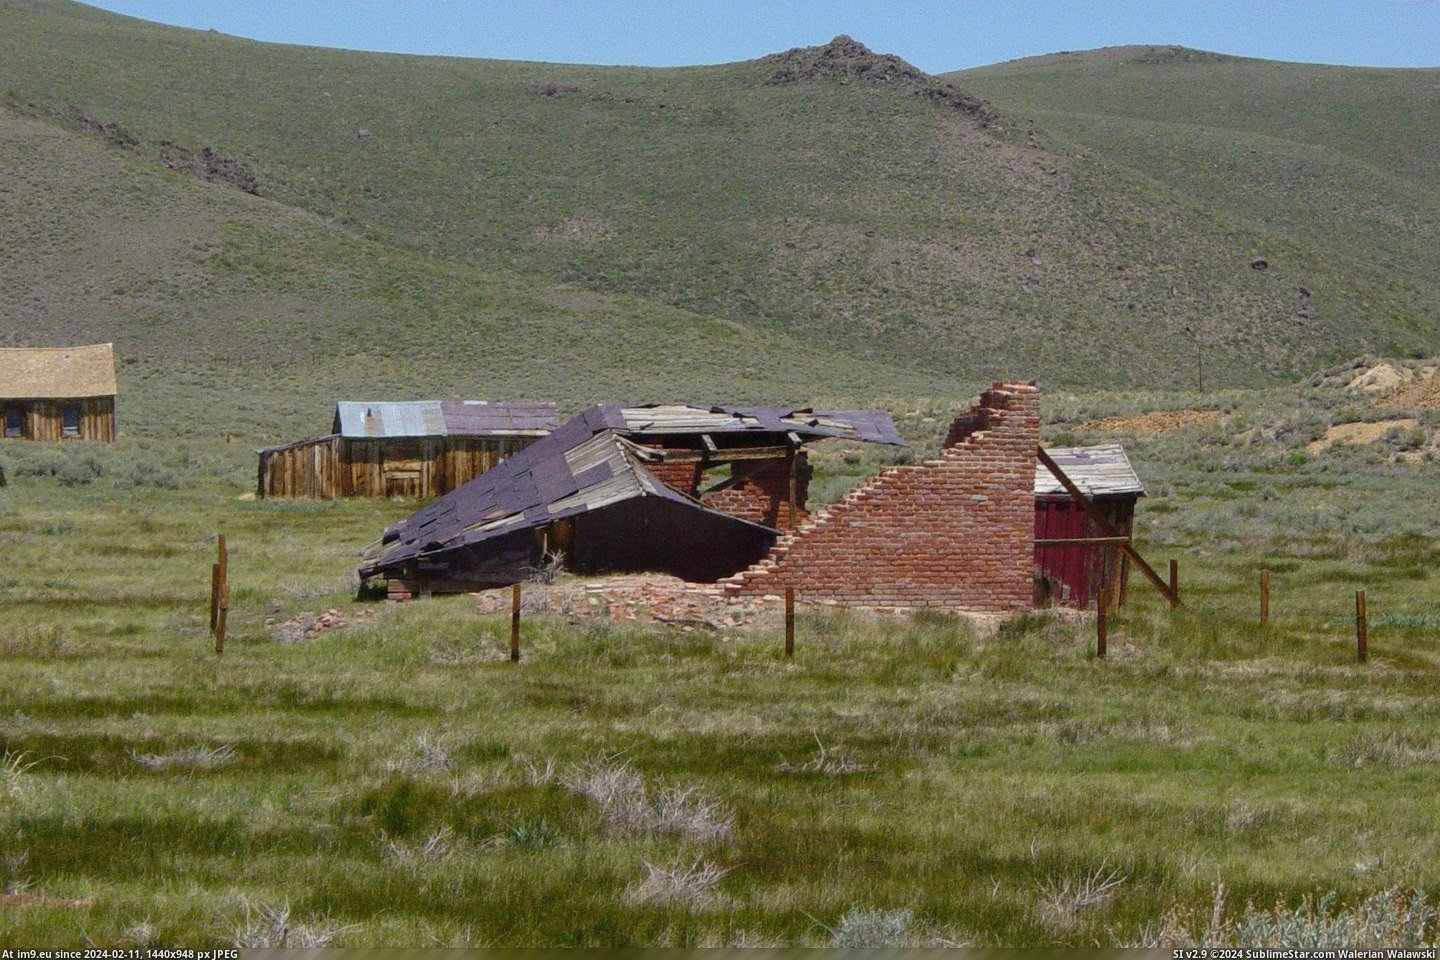 #California #Ruins #Warehouse #Mastretti #Bodie #Liquor Mastretti Liquor Warehouse Ruins In Bodie, California Pic. (Изображение из альбом Bodie - a ghost town in Eastern California))